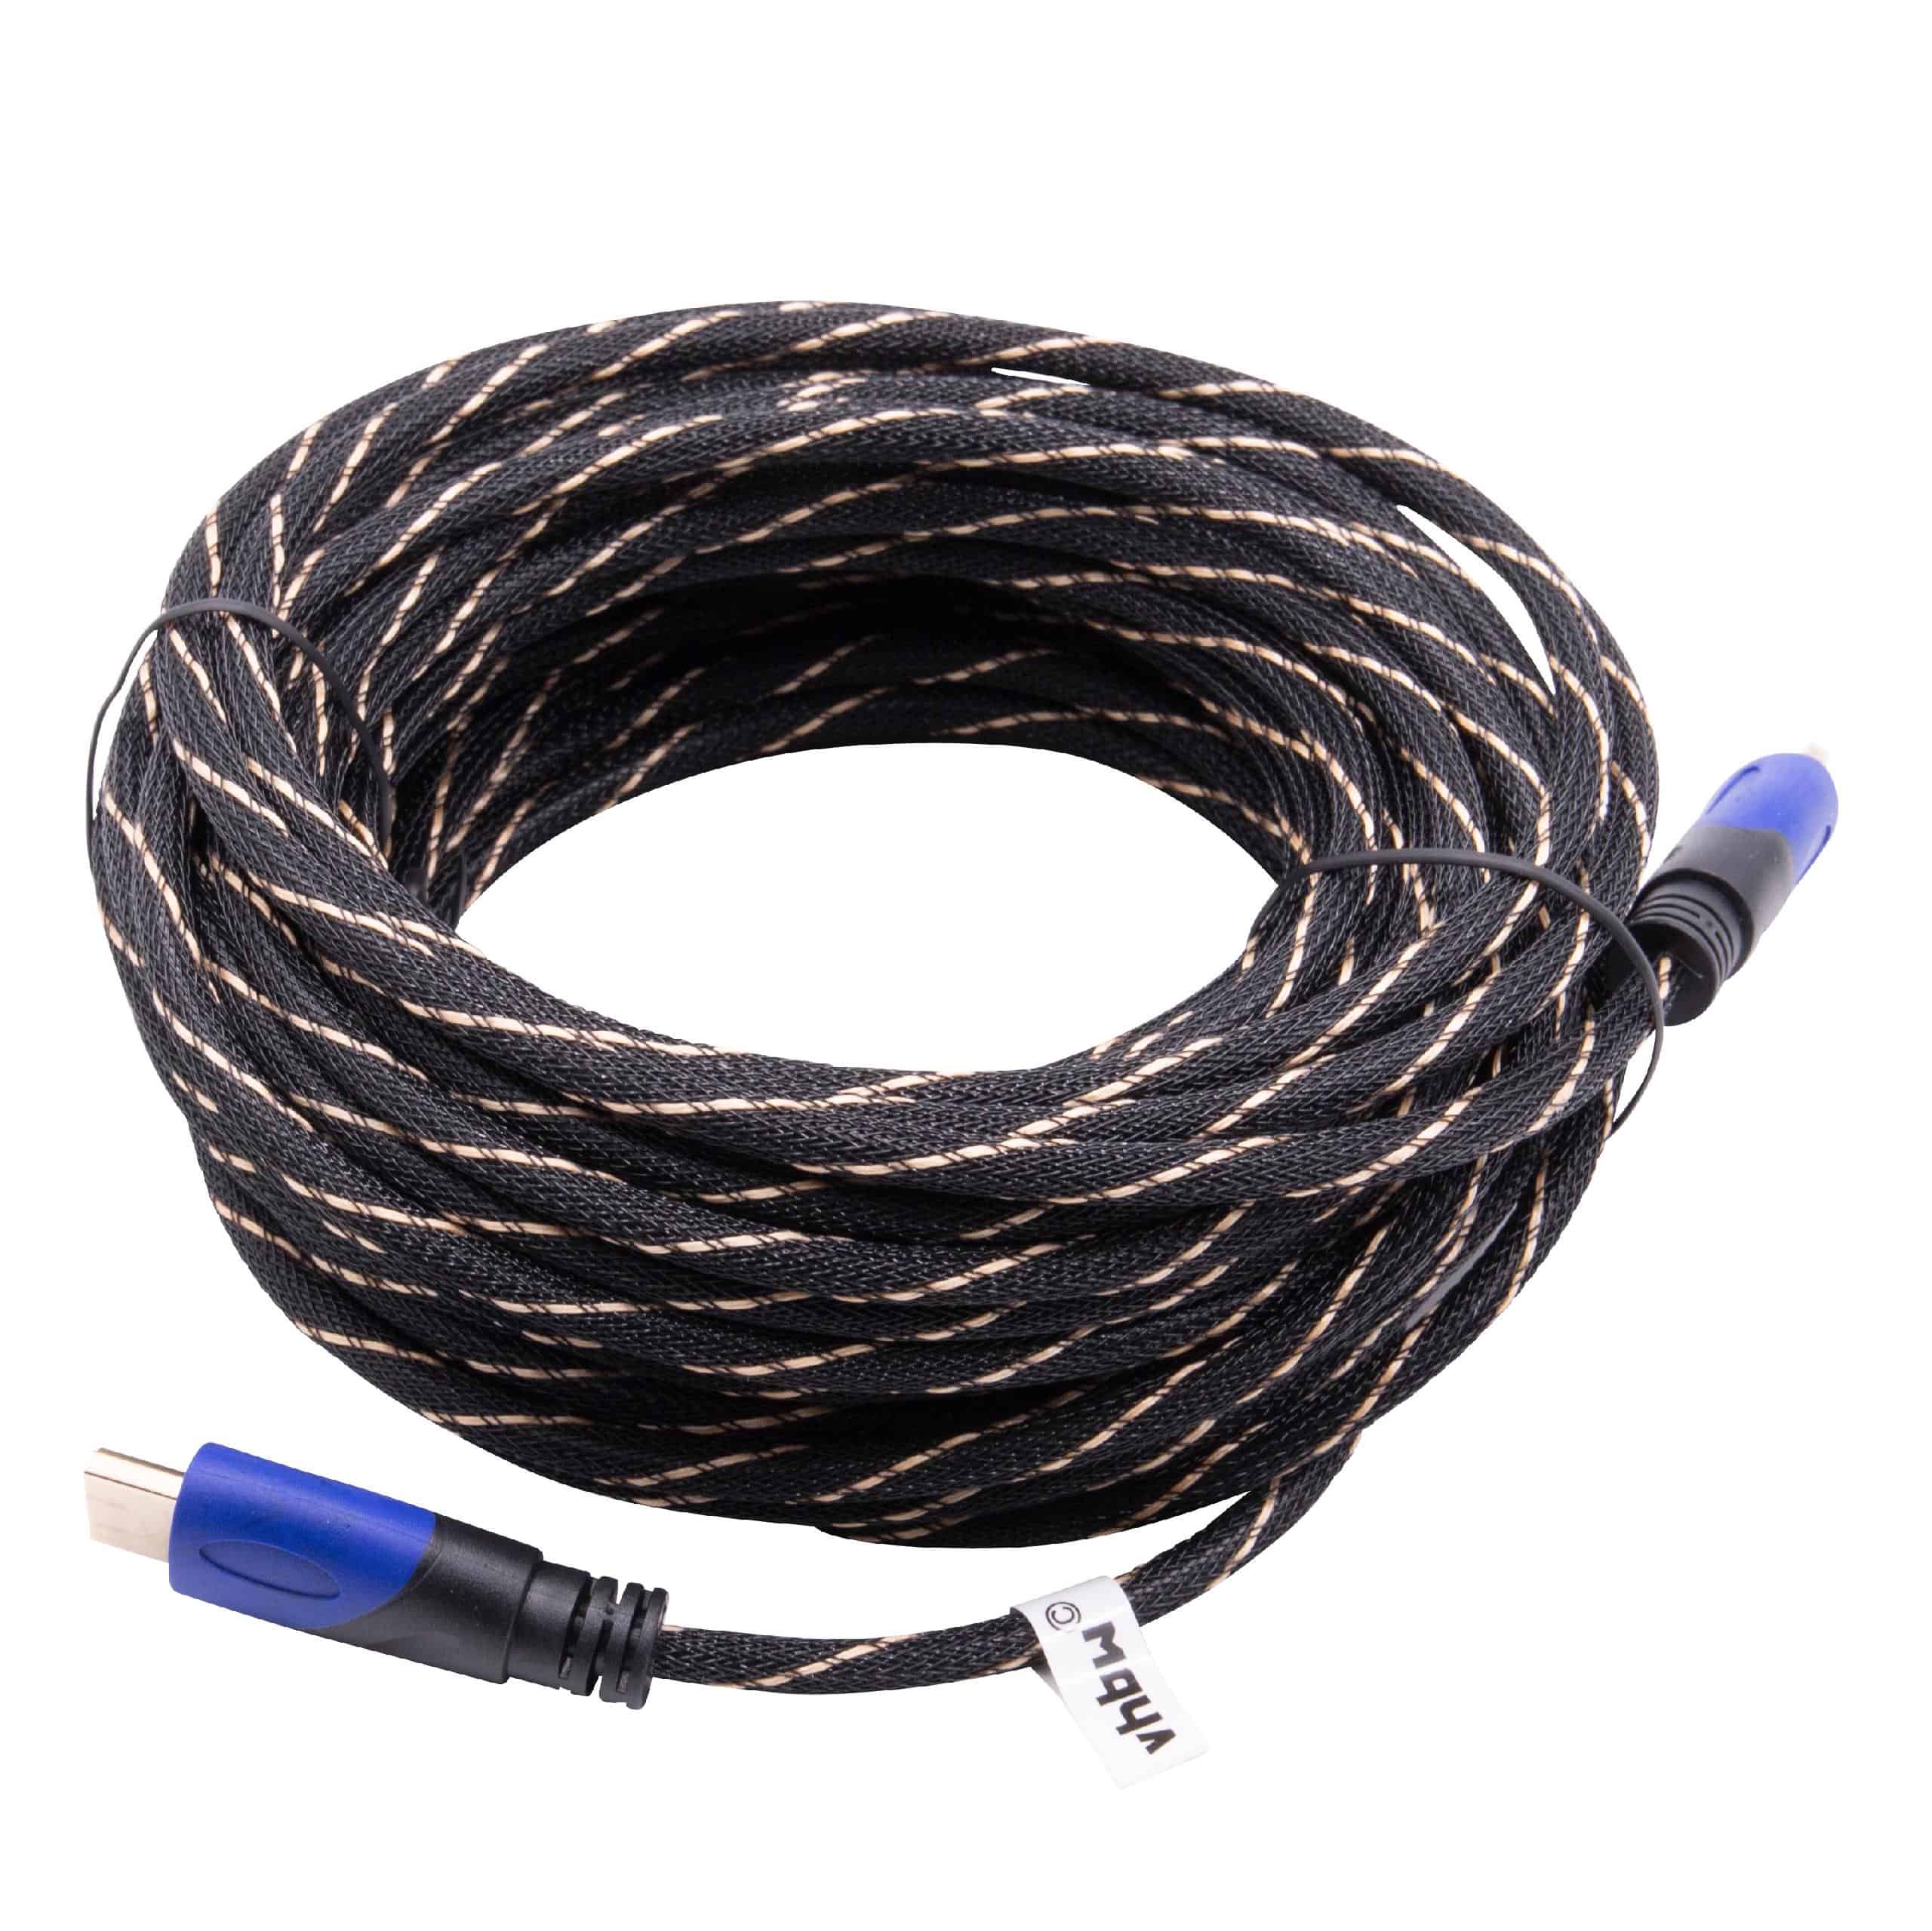 HDMI Cable V1.4 High Speed braided 15mfor Tablet, TV, Television, Playstation, Computer, Monitor, DVD Player e